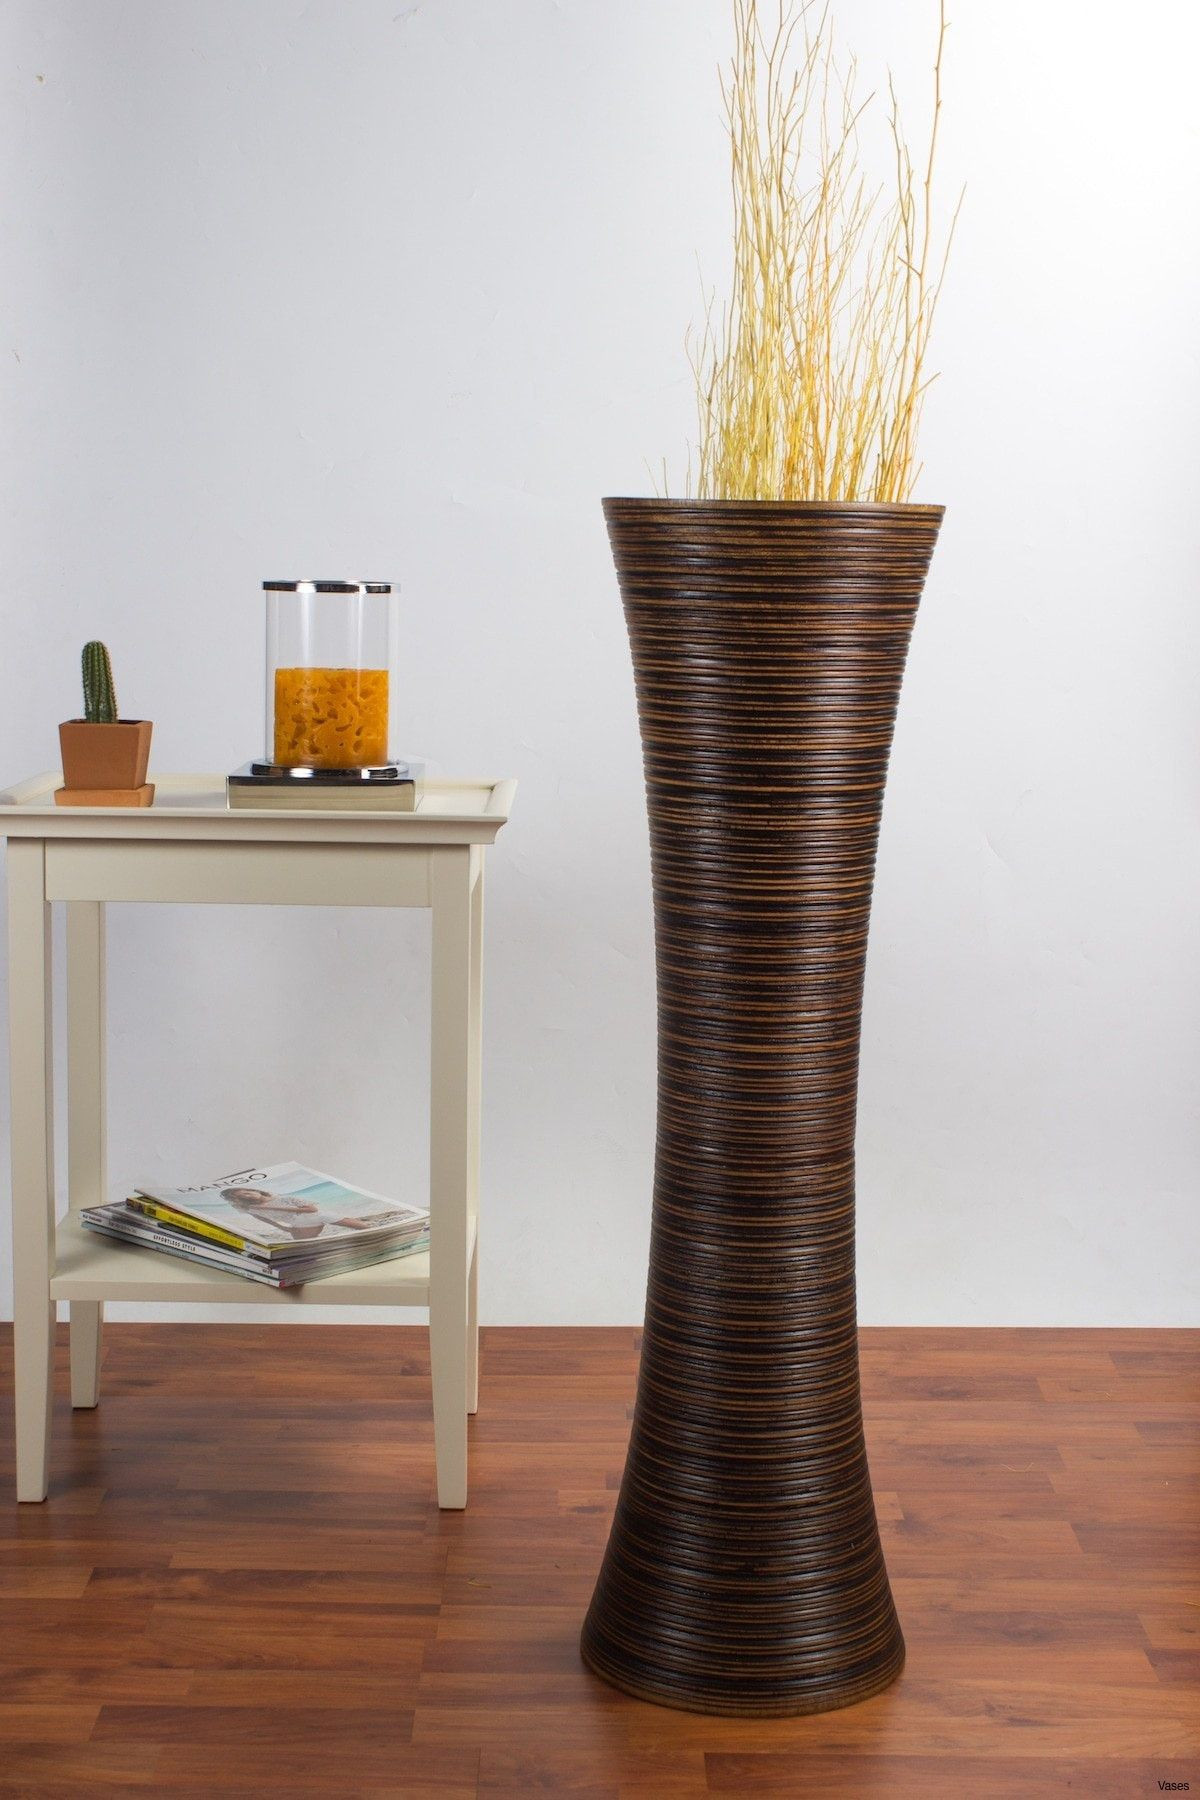 10 Nice Big Vases for Cheap 2024 free download big vases for cheap of tall decorative vases luxury decorative floor vases fresh d dkbrw in tall decorative vases luxury decorative floor vases fresh d dkbrw 5749 1h vases tall brown i